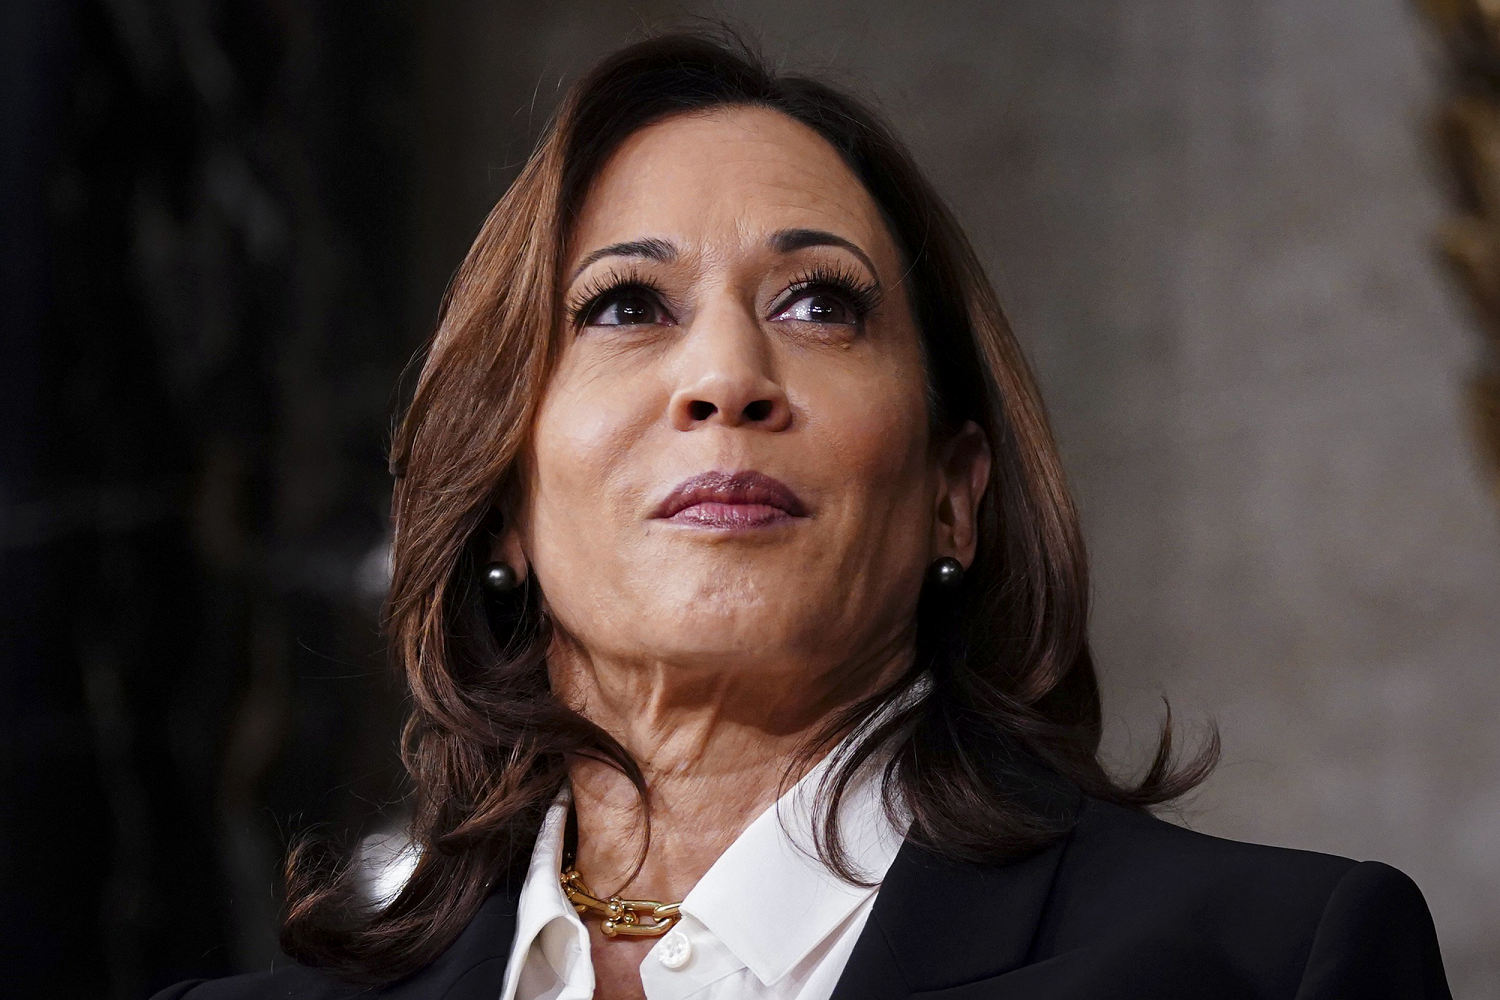 Kamala Harris fiercely defends Biden as her allies stand ready to back her should he step aside